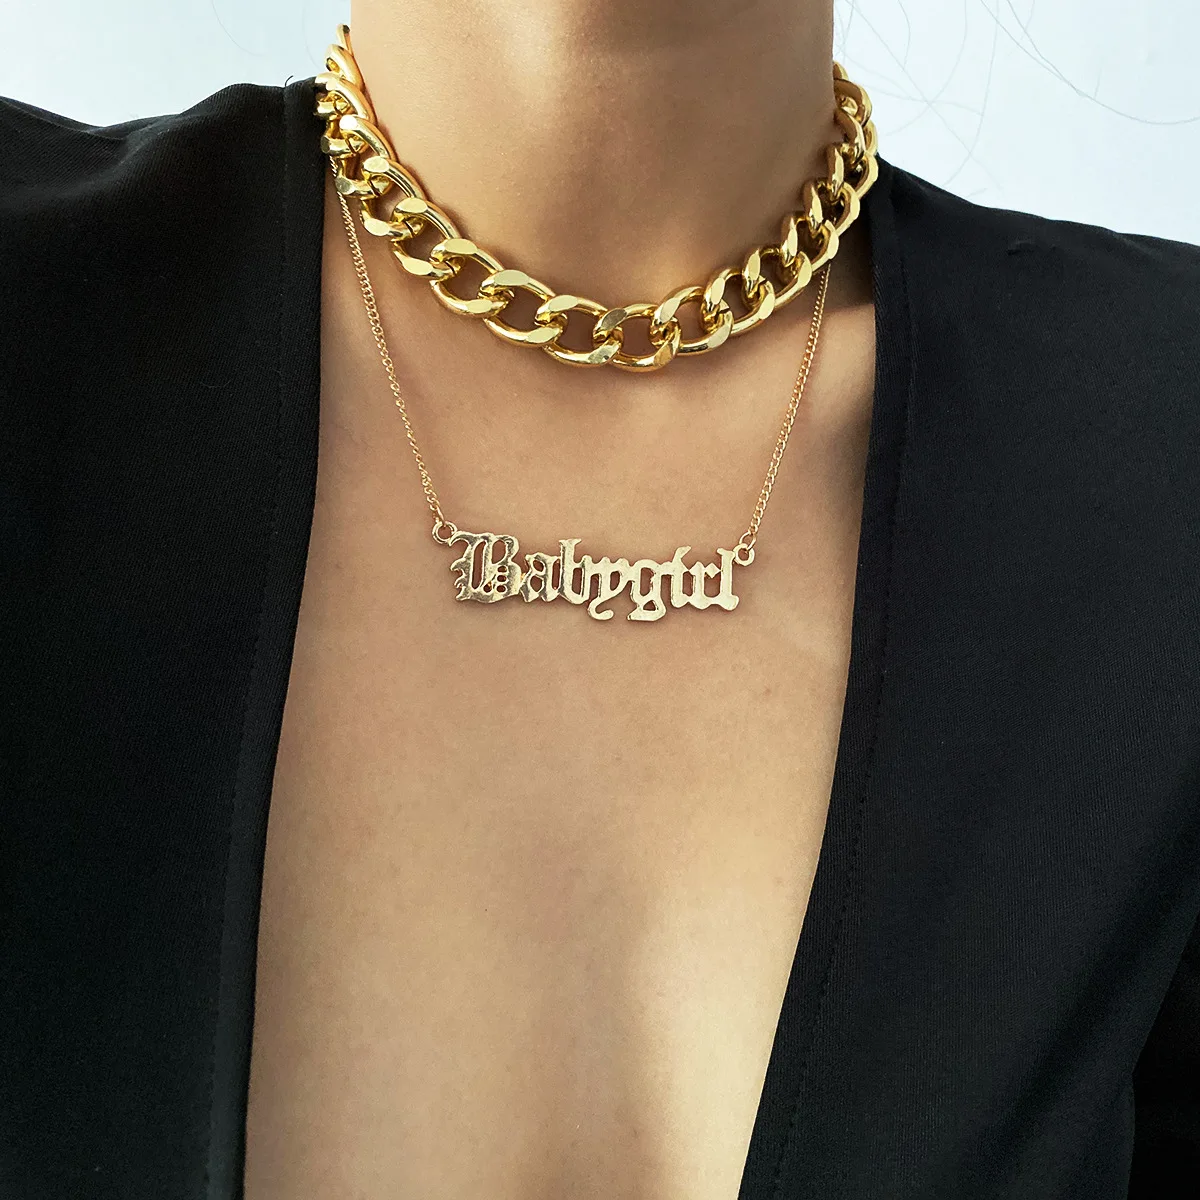 

Double Layered Gold Plated Chunky Choker Necklace Old Font English Letter Babygirl Necklace For Women Girls, As picture show